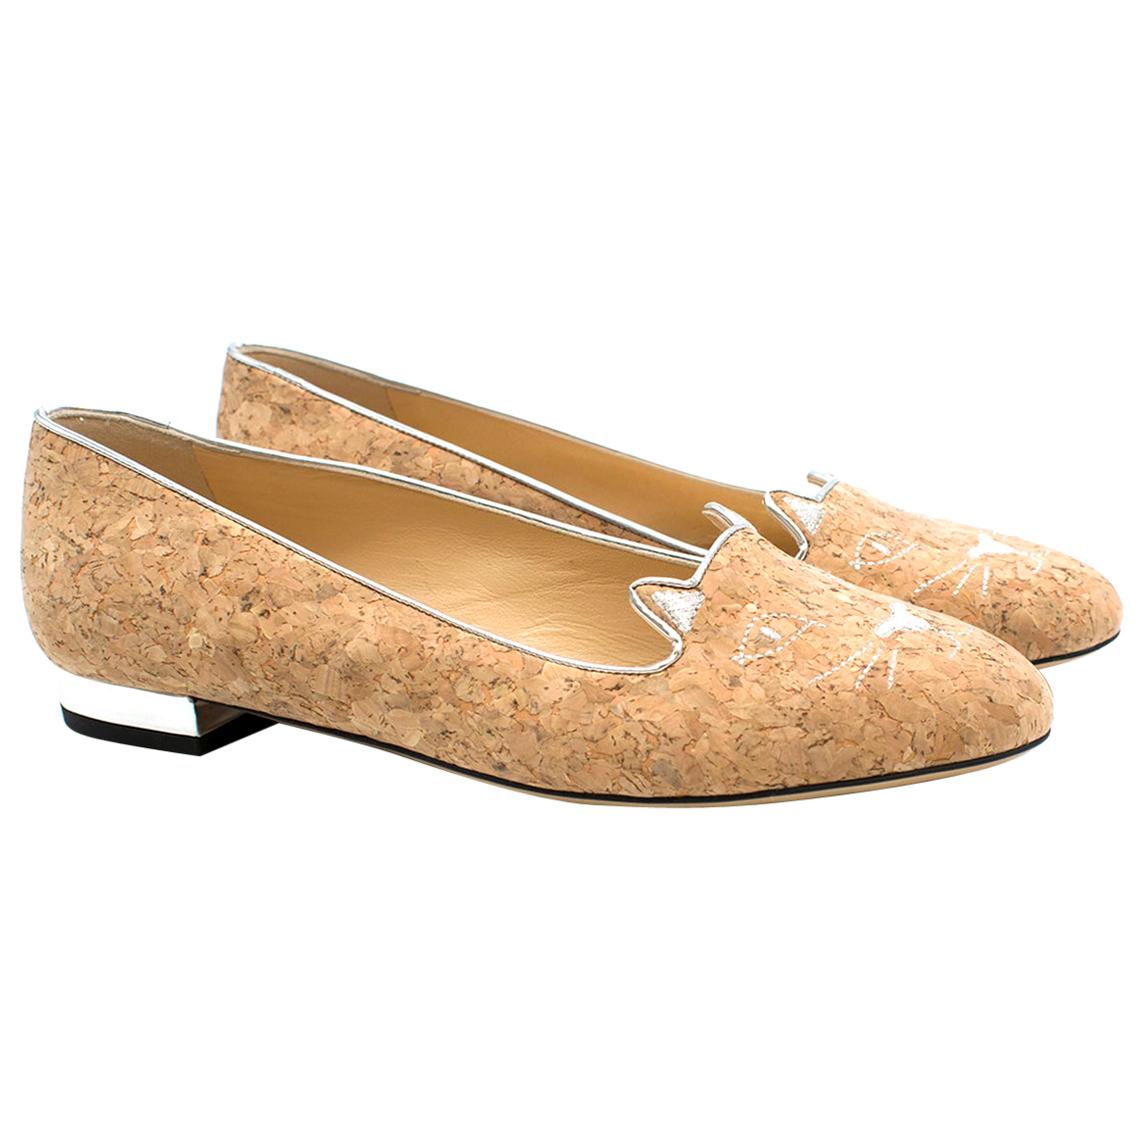 Charlotte Olympia Kitty Cork Loafers SIZE 37